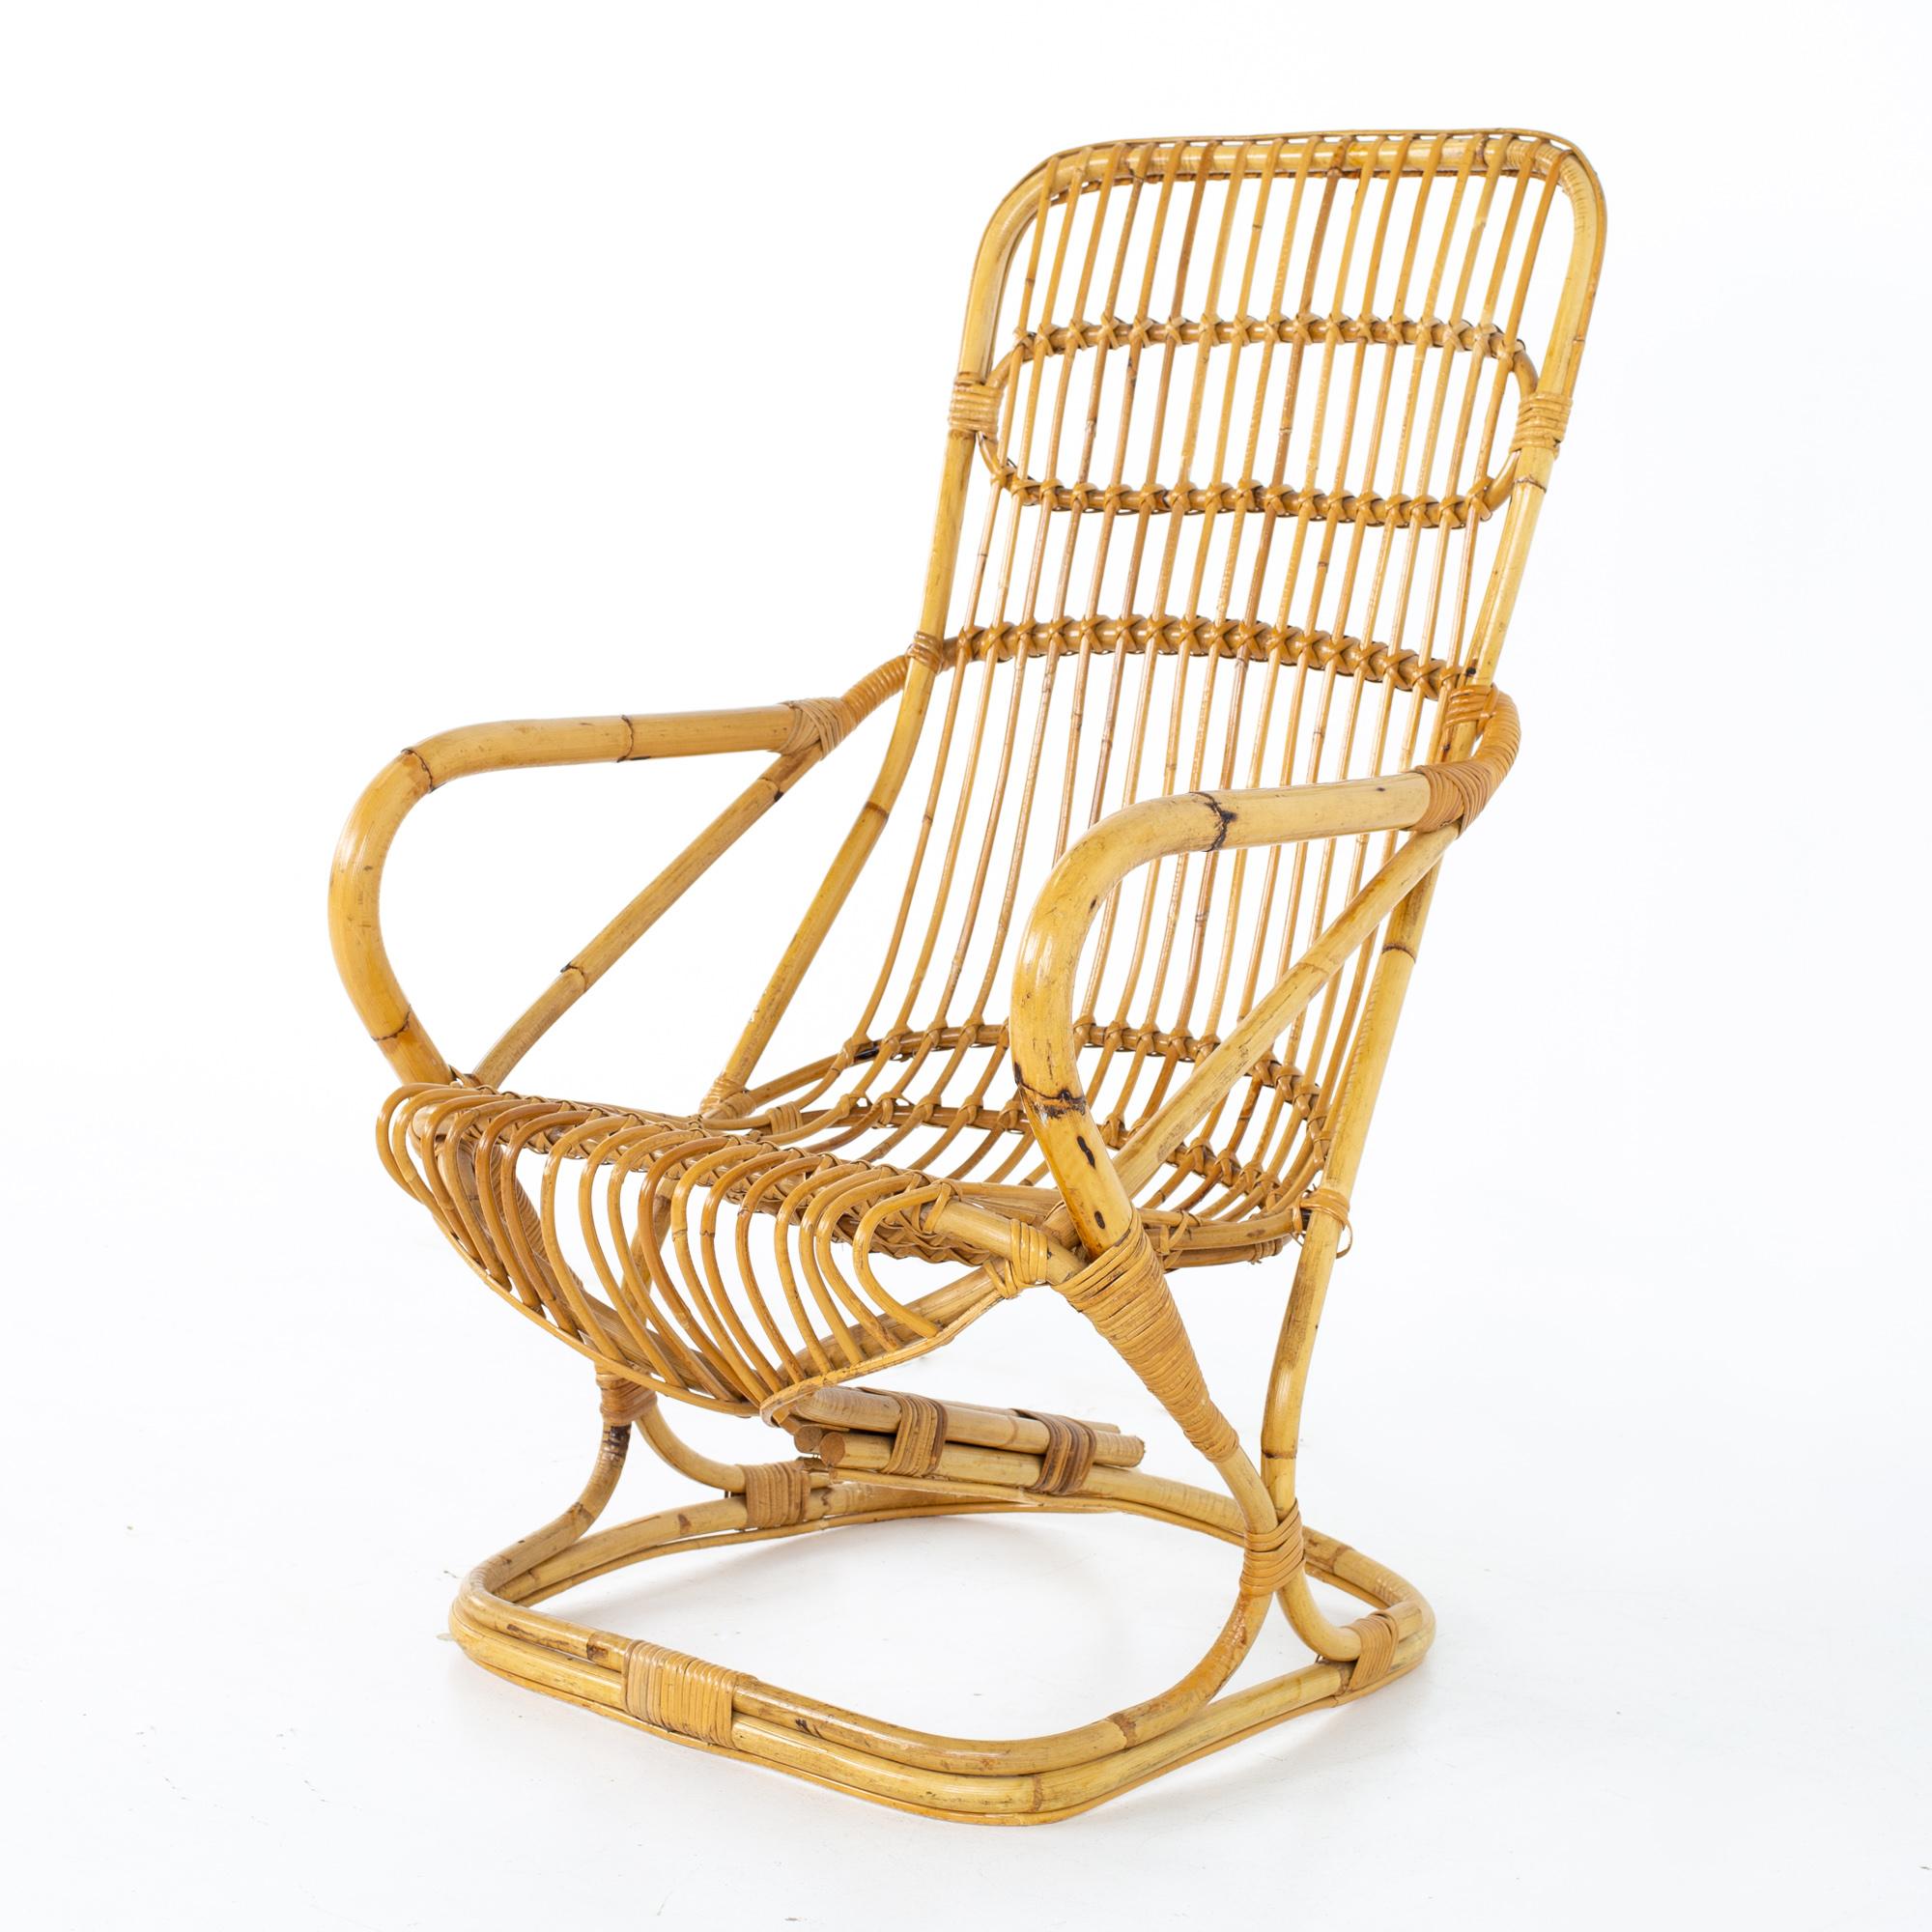 Mid Century Rattan Rocking Lounge Chair

Lounge chair measures: 24 wide x 29 deep x 42 high, with a seat height of 16 inches

All pieces of furniture can be had in what we call restored vintage condition. That means the piece is restored upon